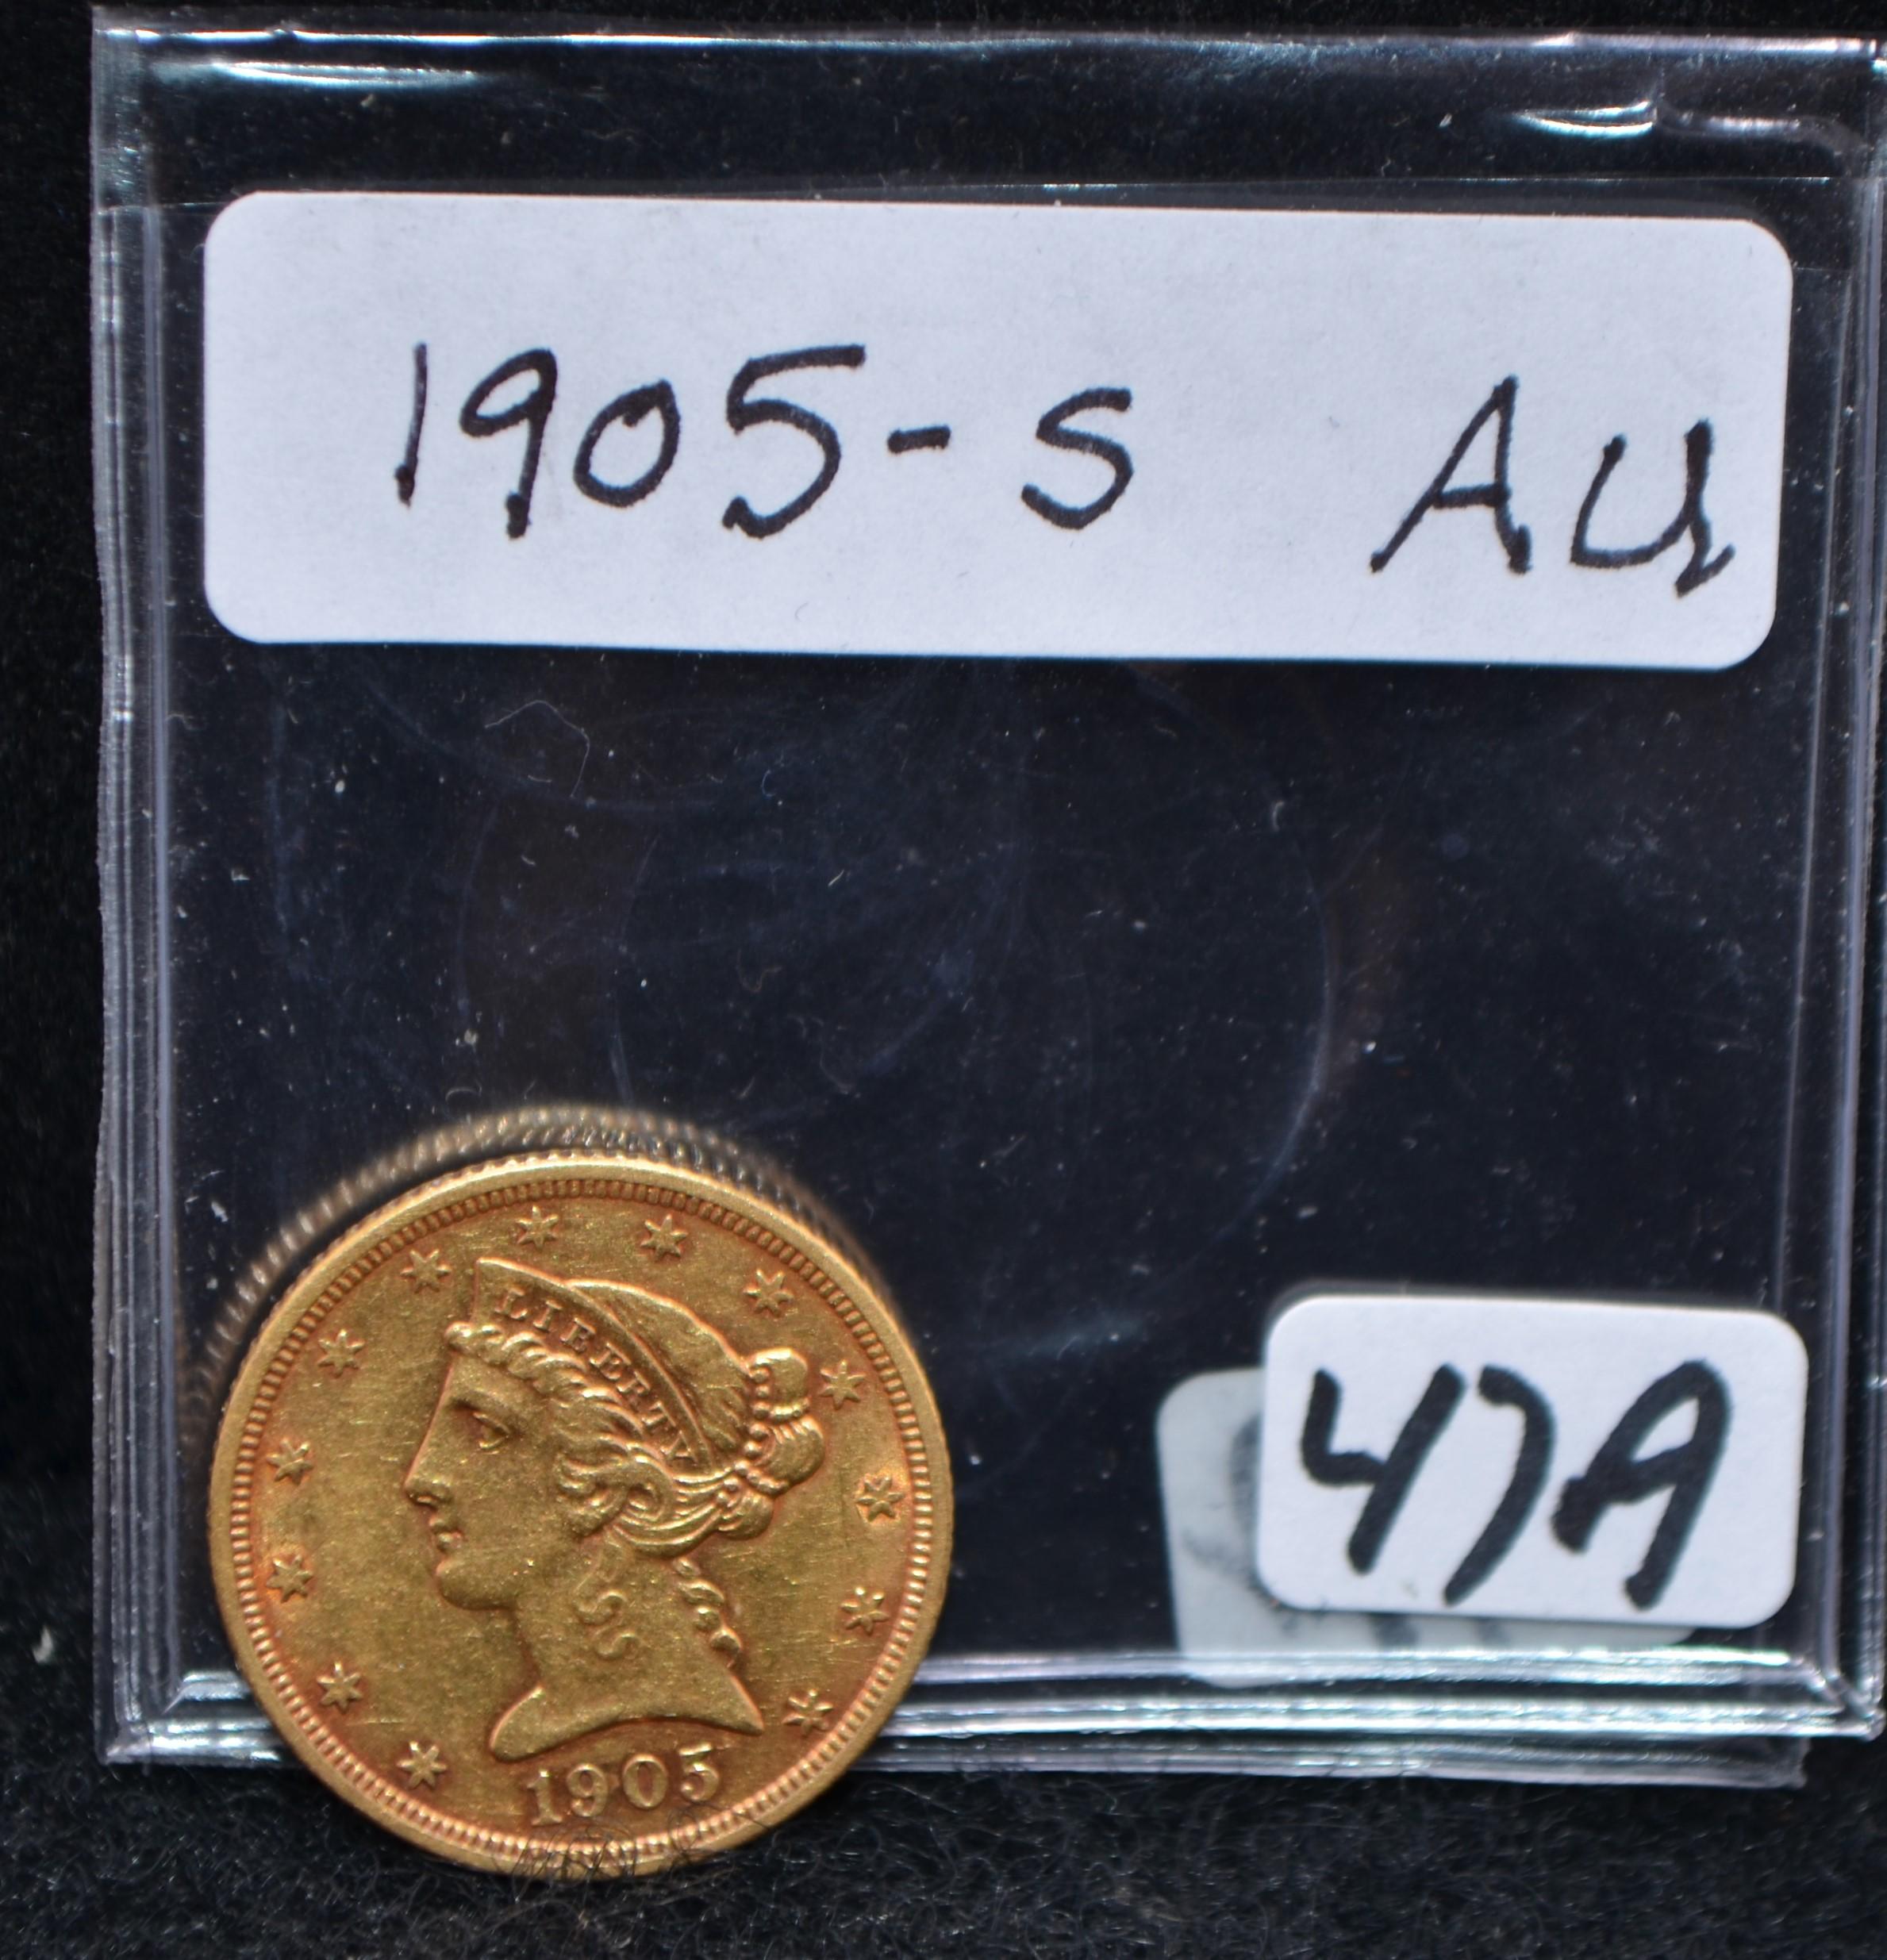 1905-S $5 LIBERTY HEAD GOLD COIN